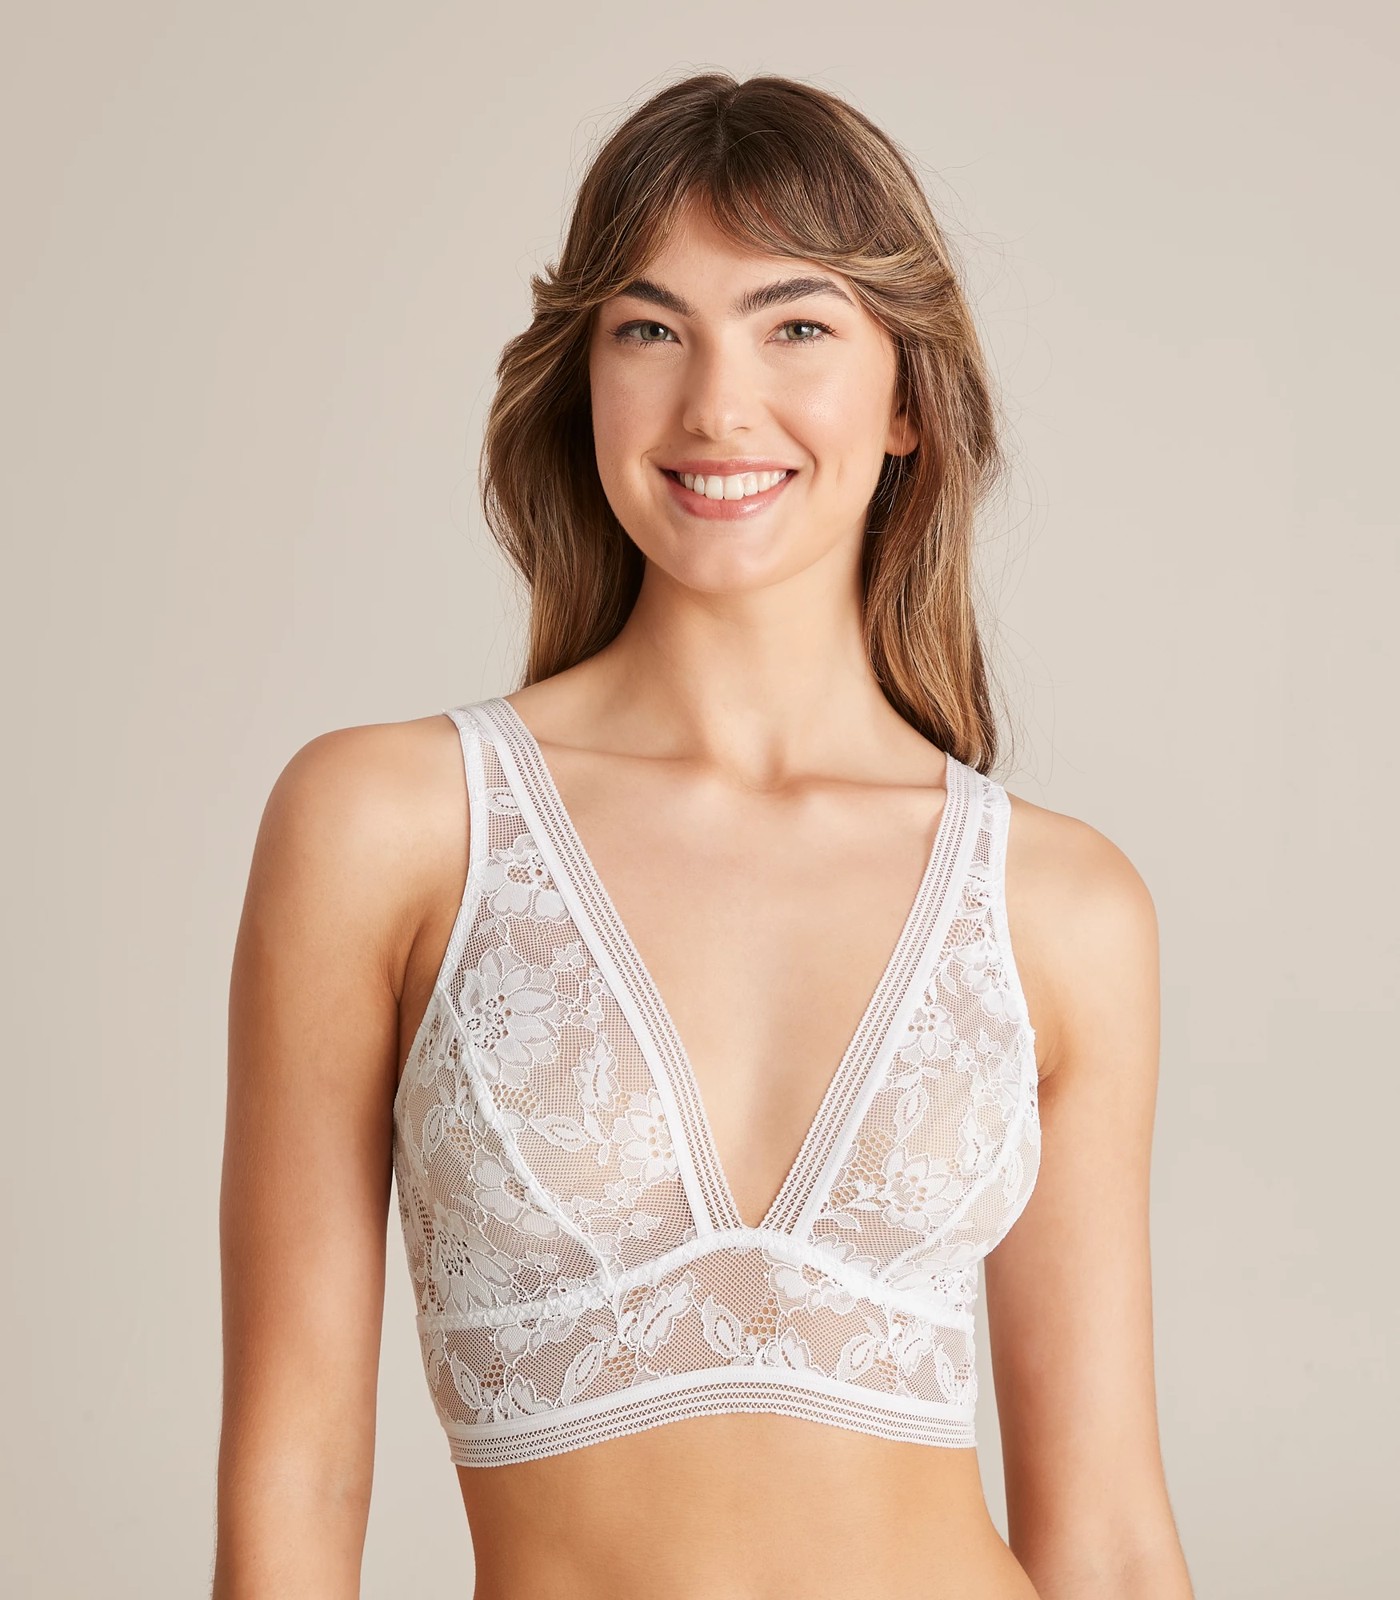 Lace Soft Cup Bralette - White